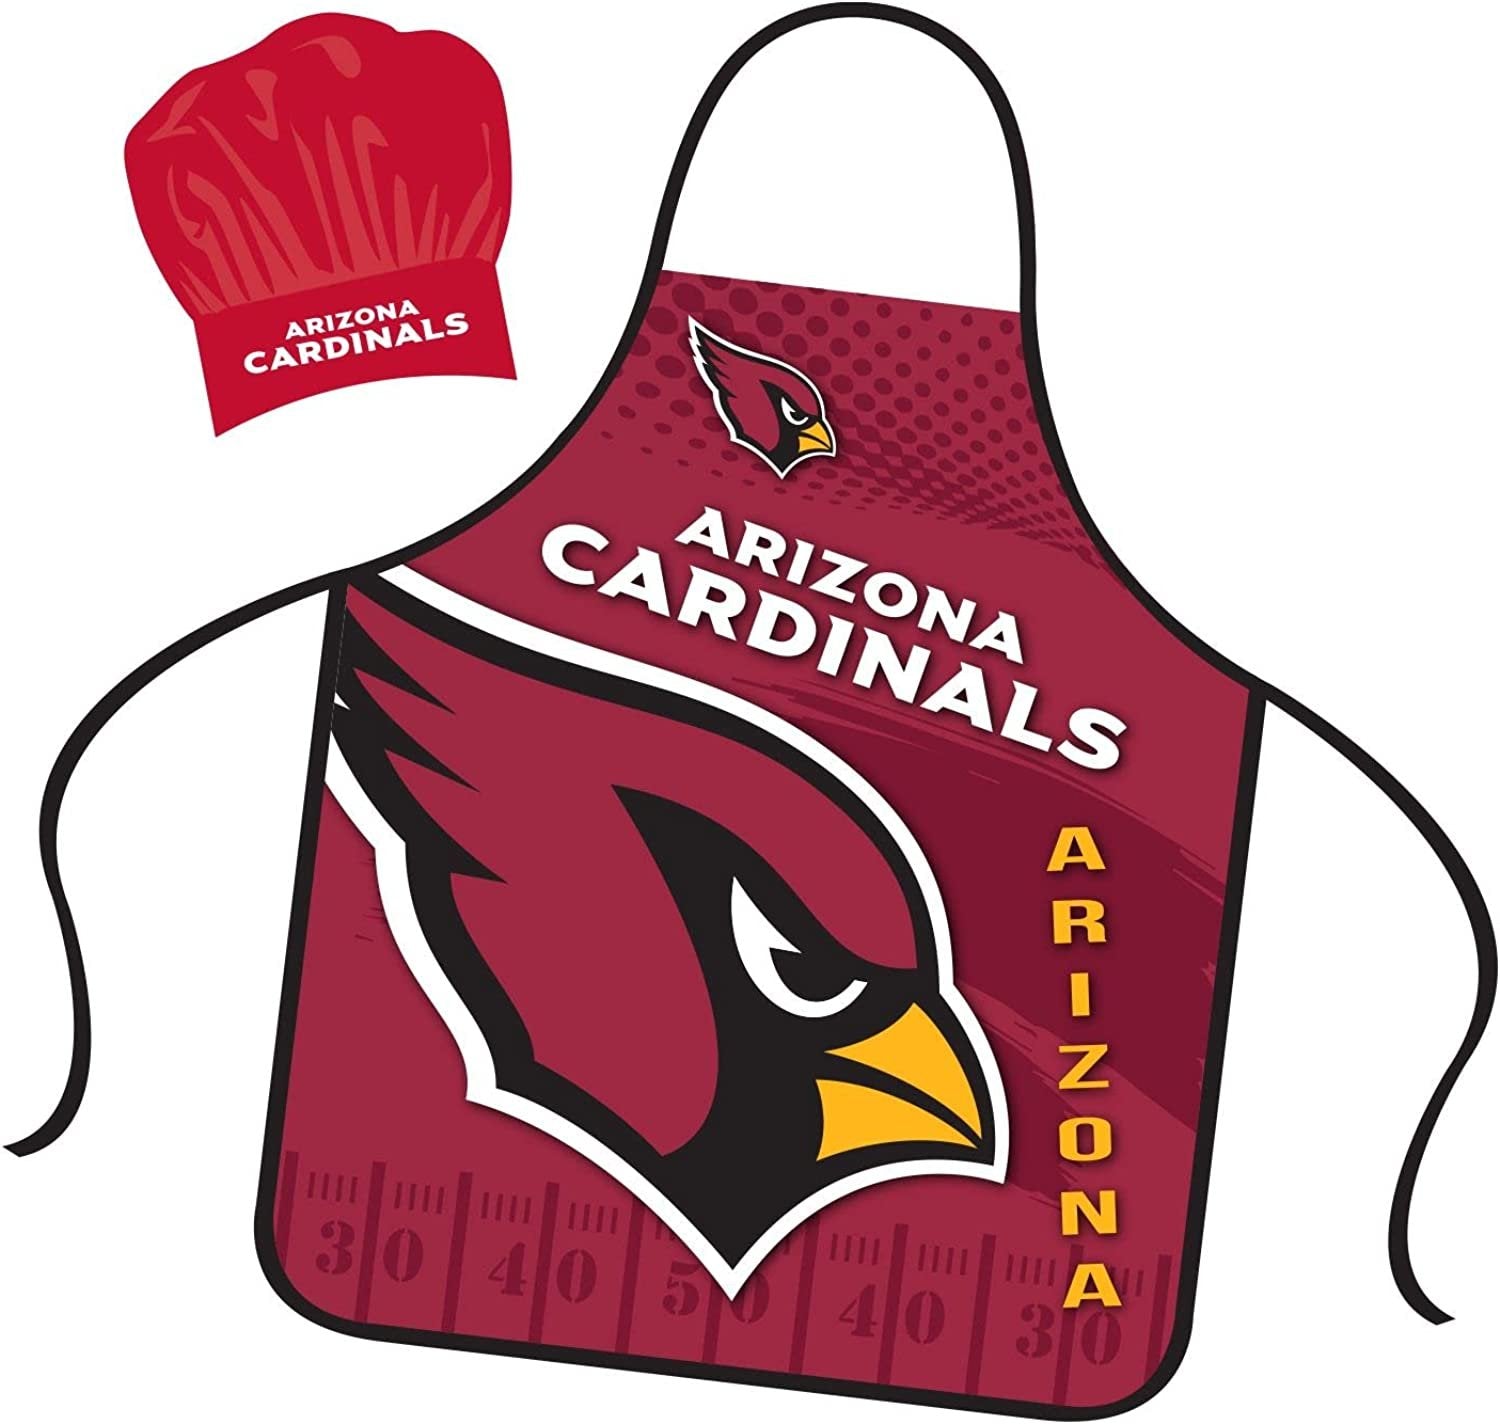 Arizona Cardinals Apron Chef Hat Set Full Color Universal Size Tie Back Grilling Tailgate BBQ Cooking Host